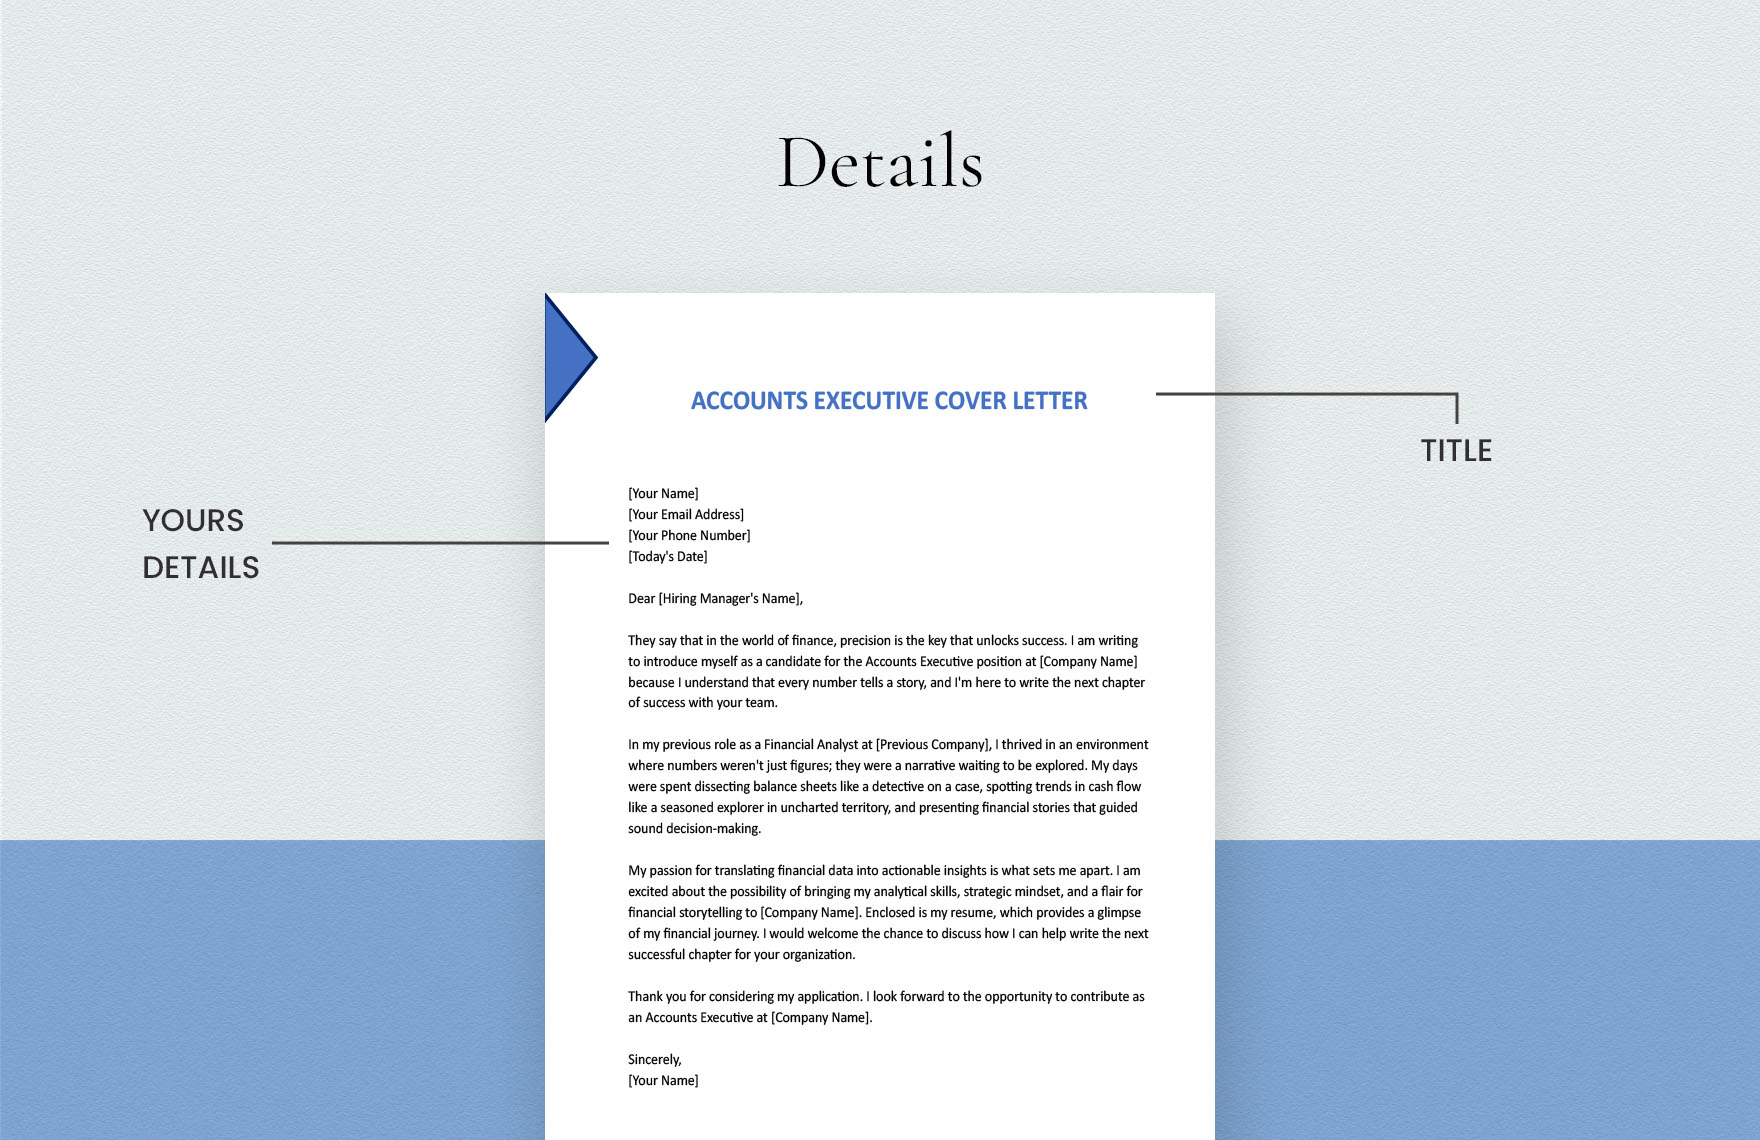 Accounts Executive Cover Letter